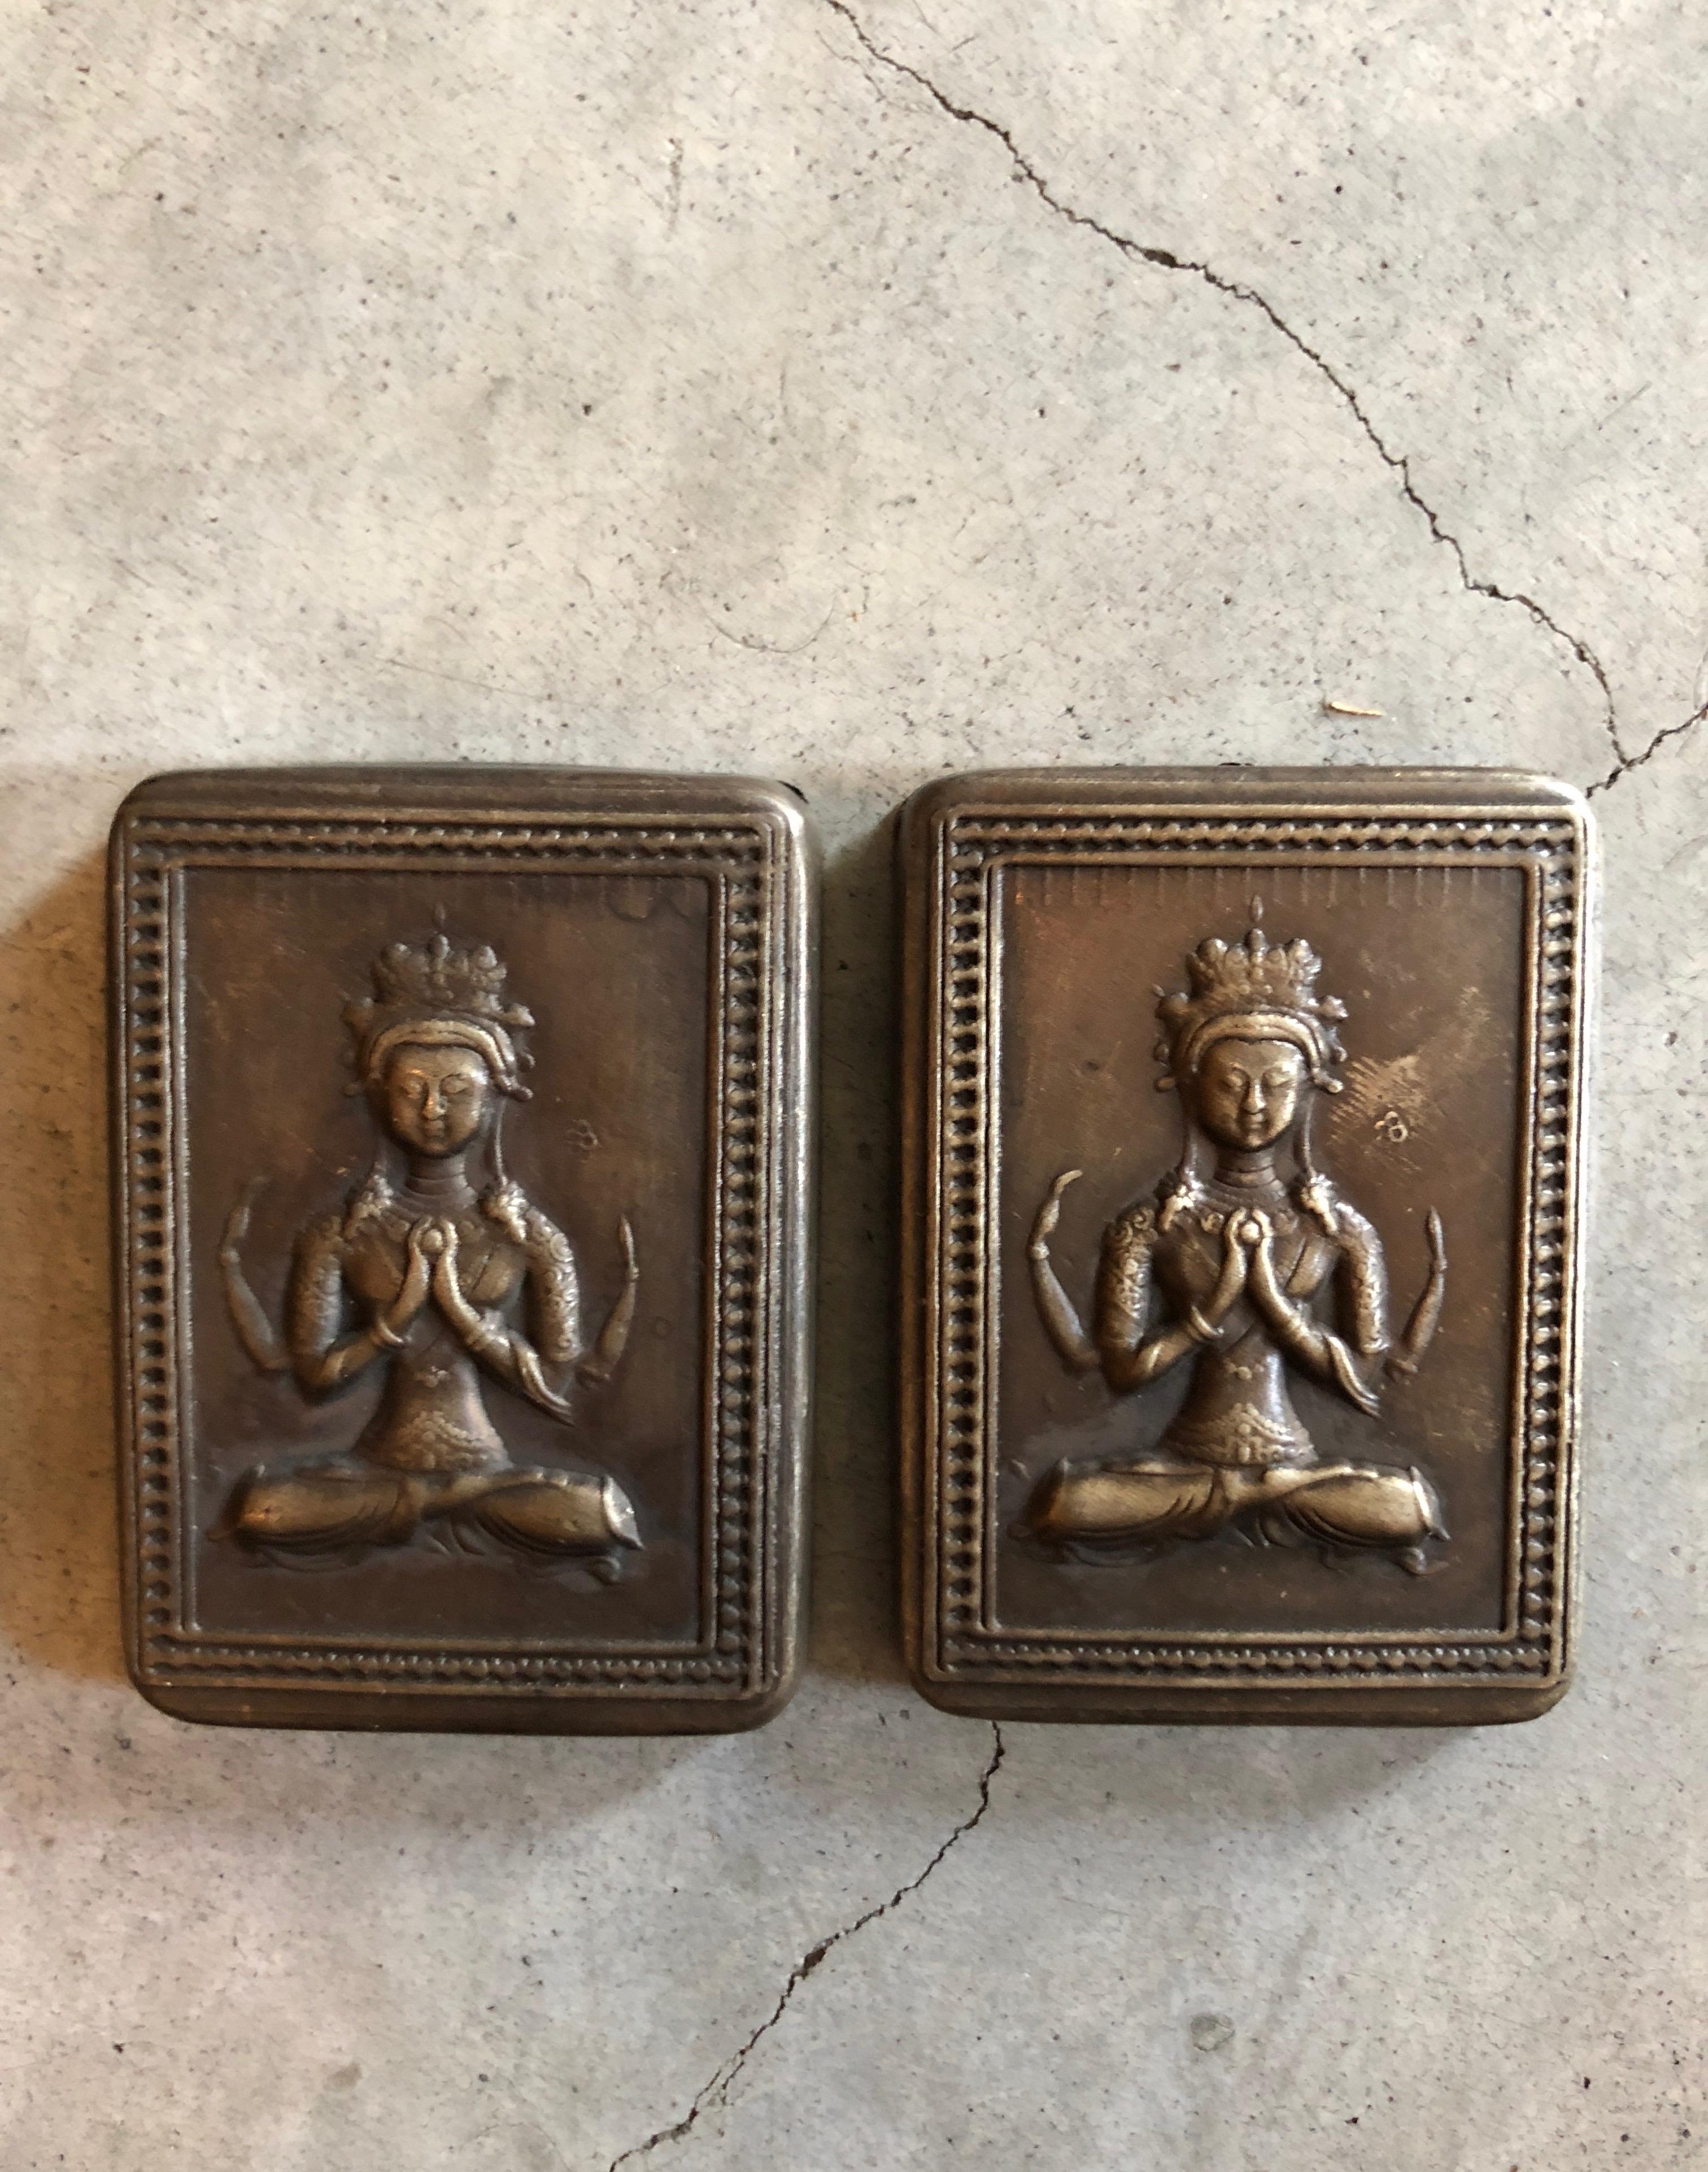 Small, perfectly worn bronze ink boxes with beautifully crafted repousse images of Buddha on the front and striking, elaborate engraving on the back of each box. These unusual and stunning objects work perfectly as small jewelry boxes (see images).